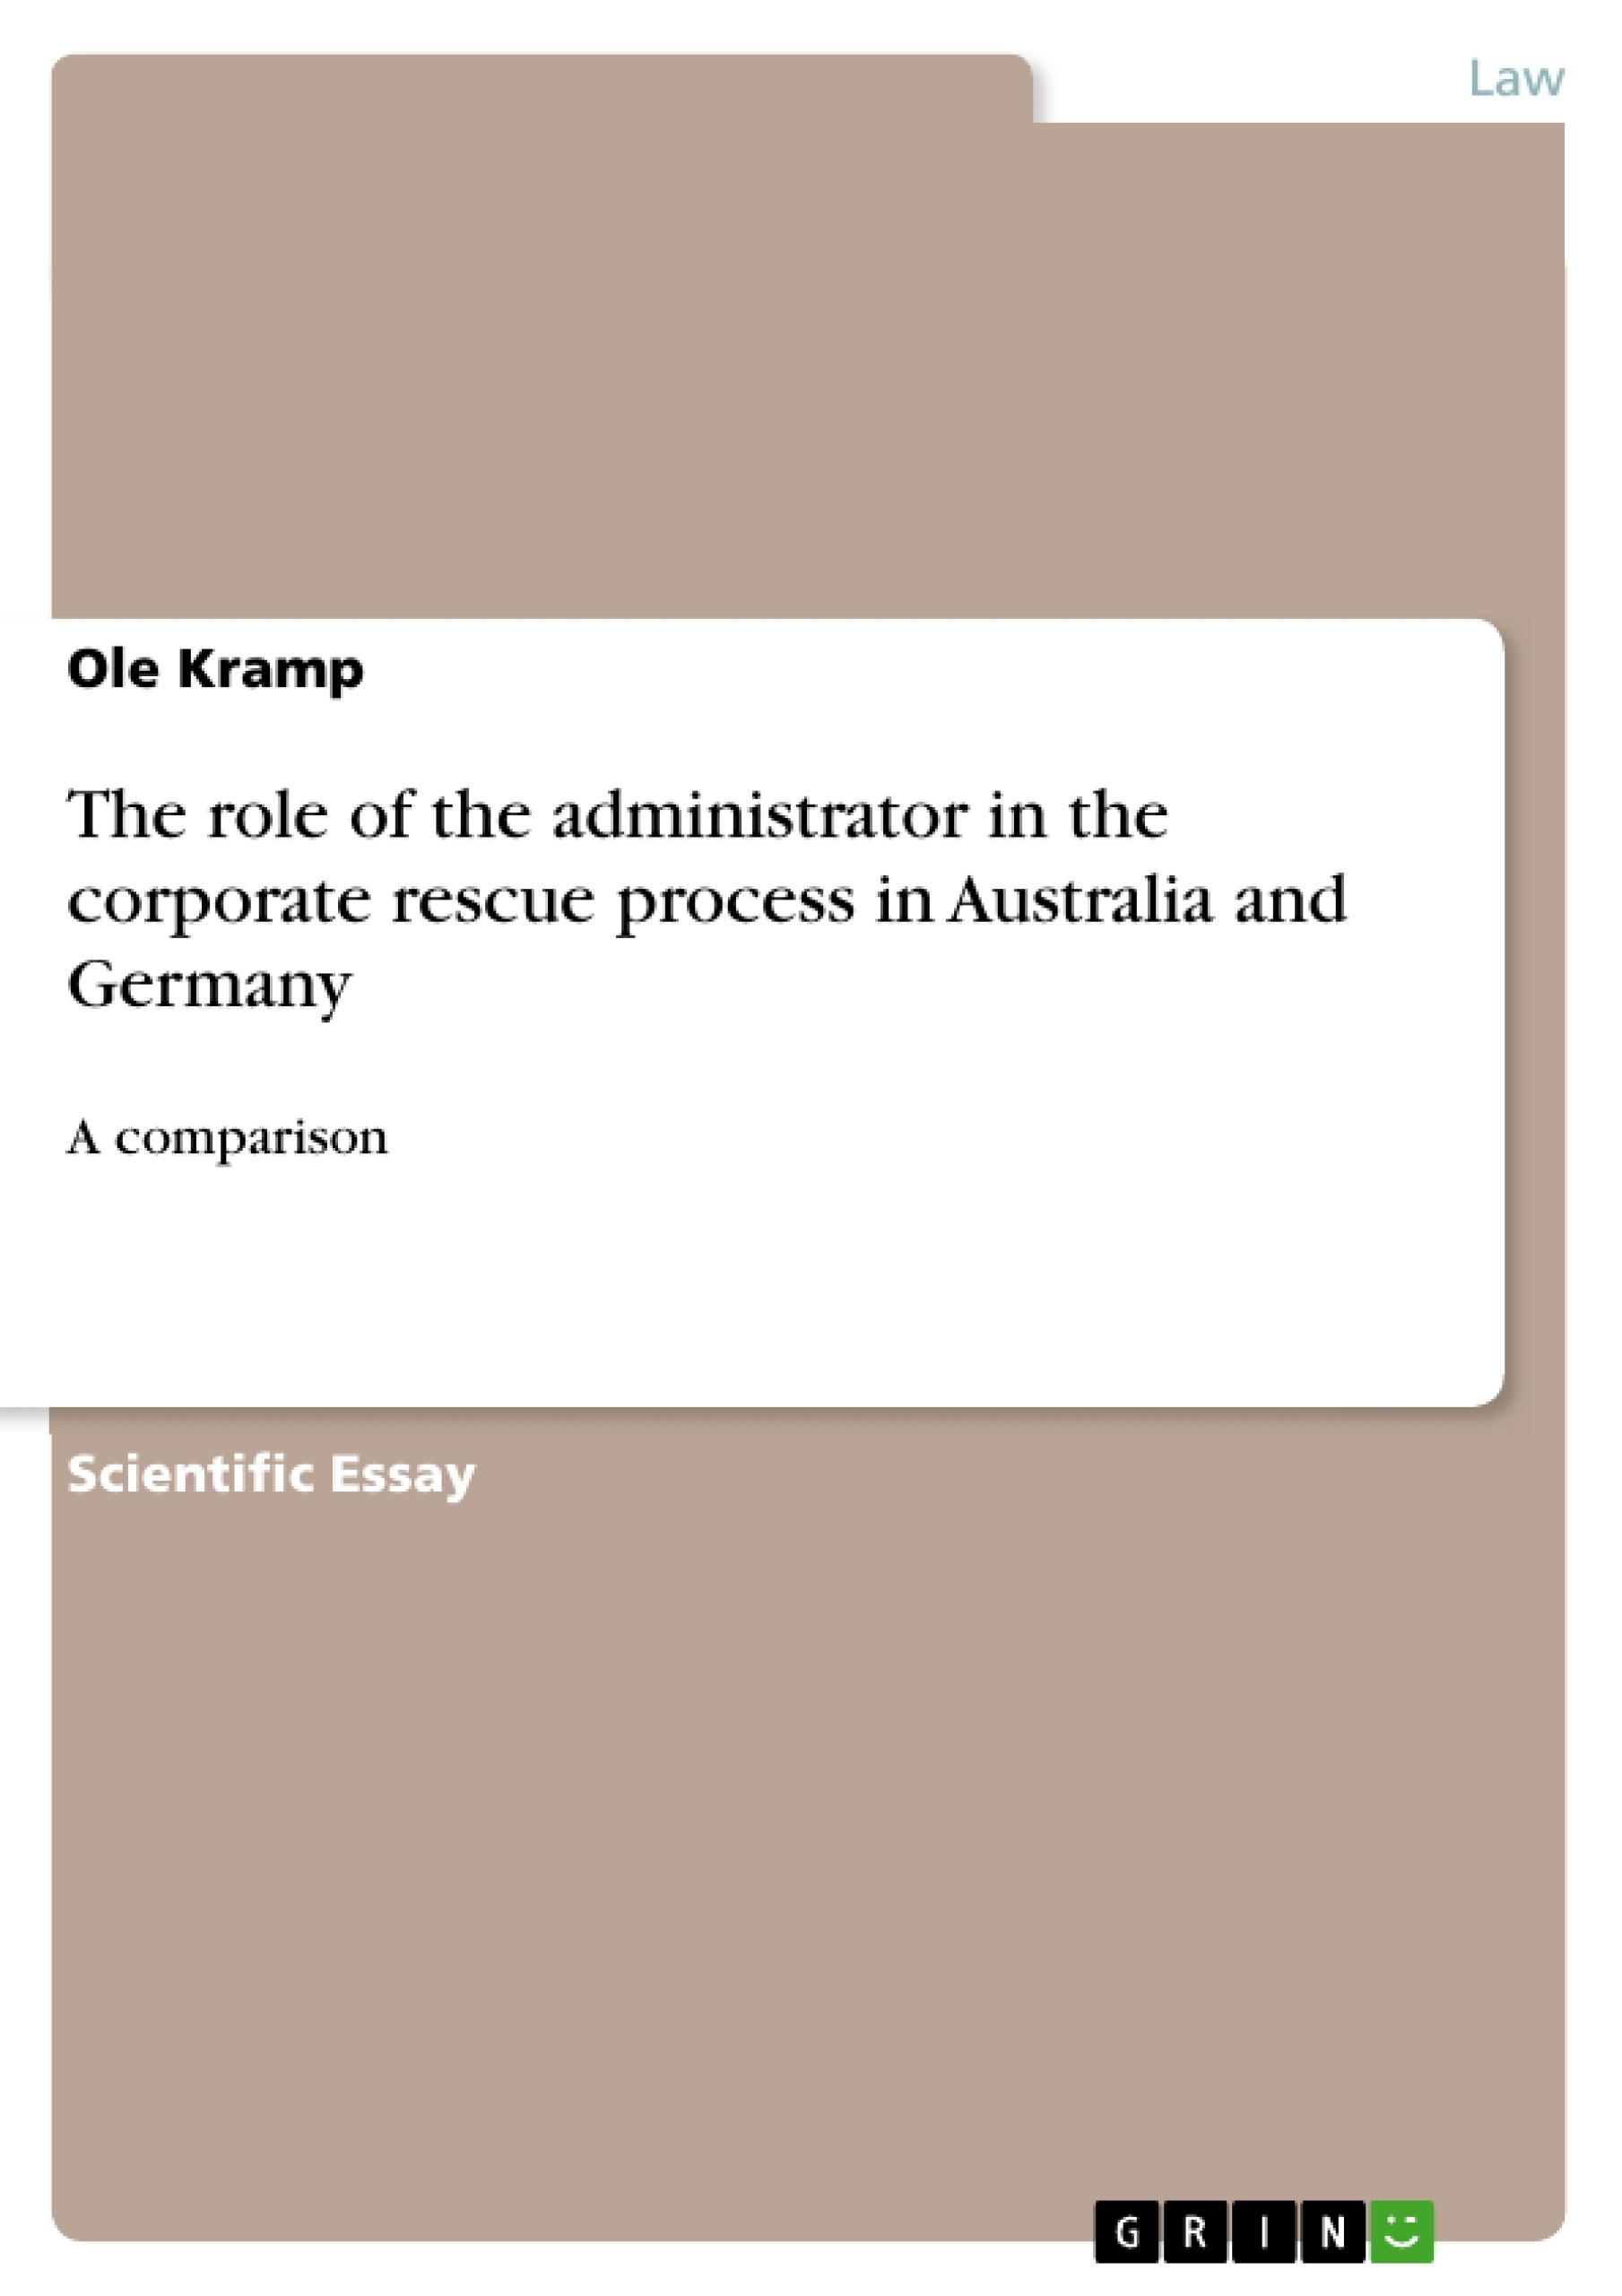 Título: The role of the administrator in the corporate rescue process in Australia and Germany